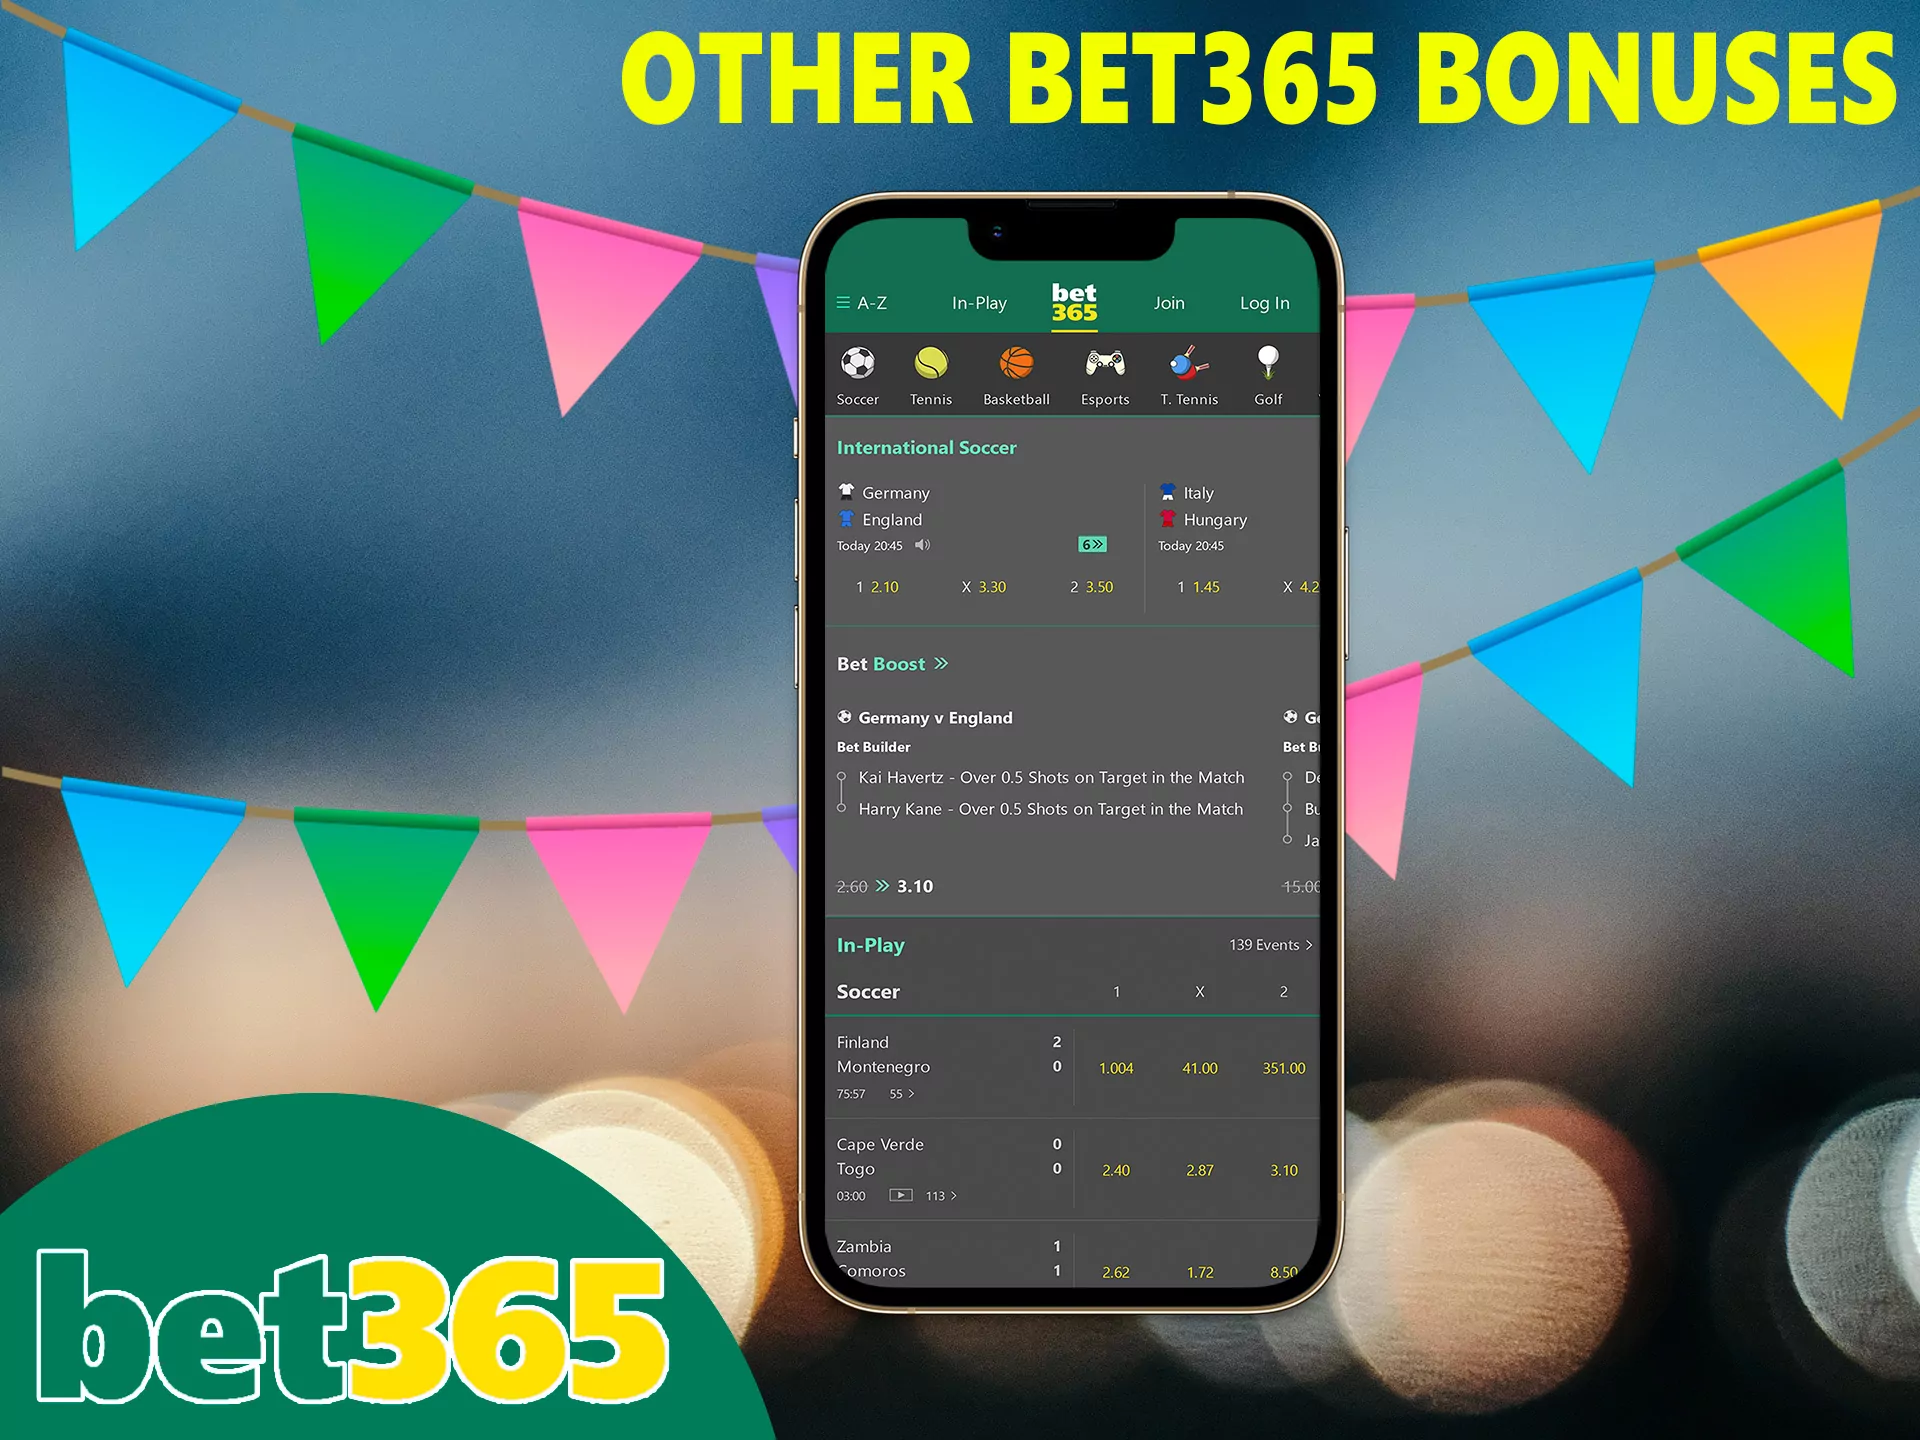 Bet365 has a large number of bonuses, after authorization the player will see the full list.